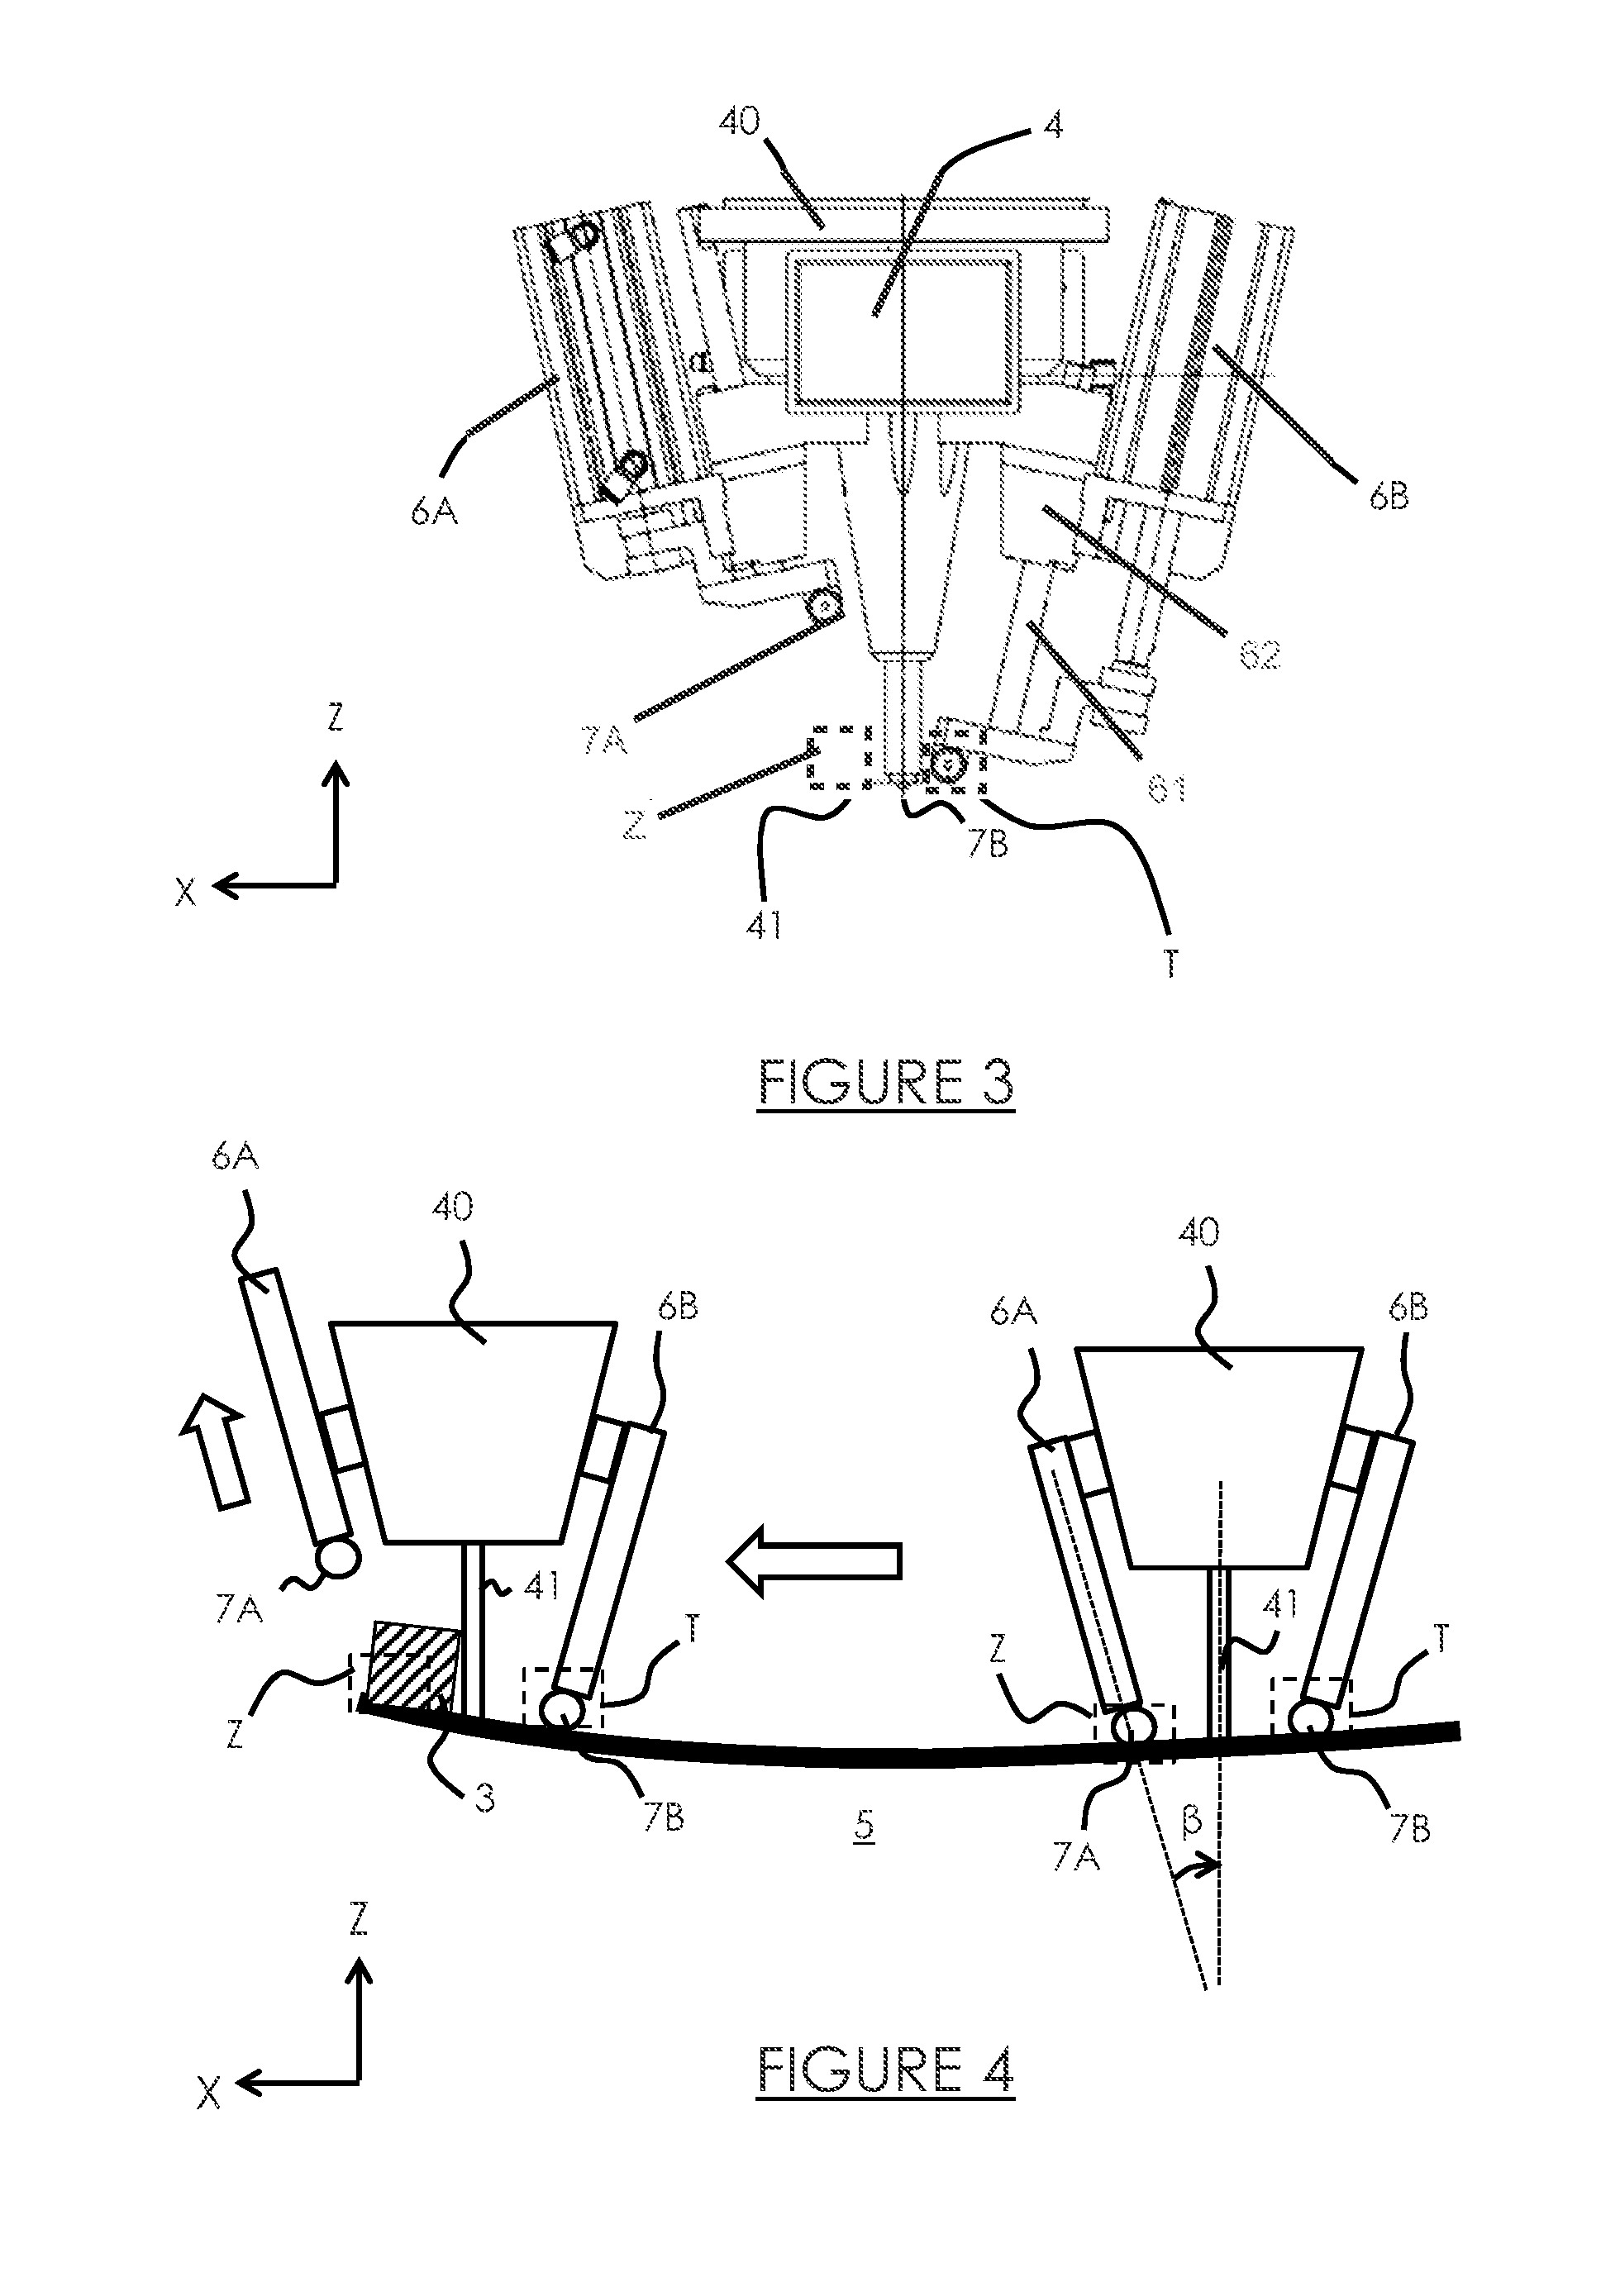 Friction stir welding tool comprising a retractable guide member and a welding process